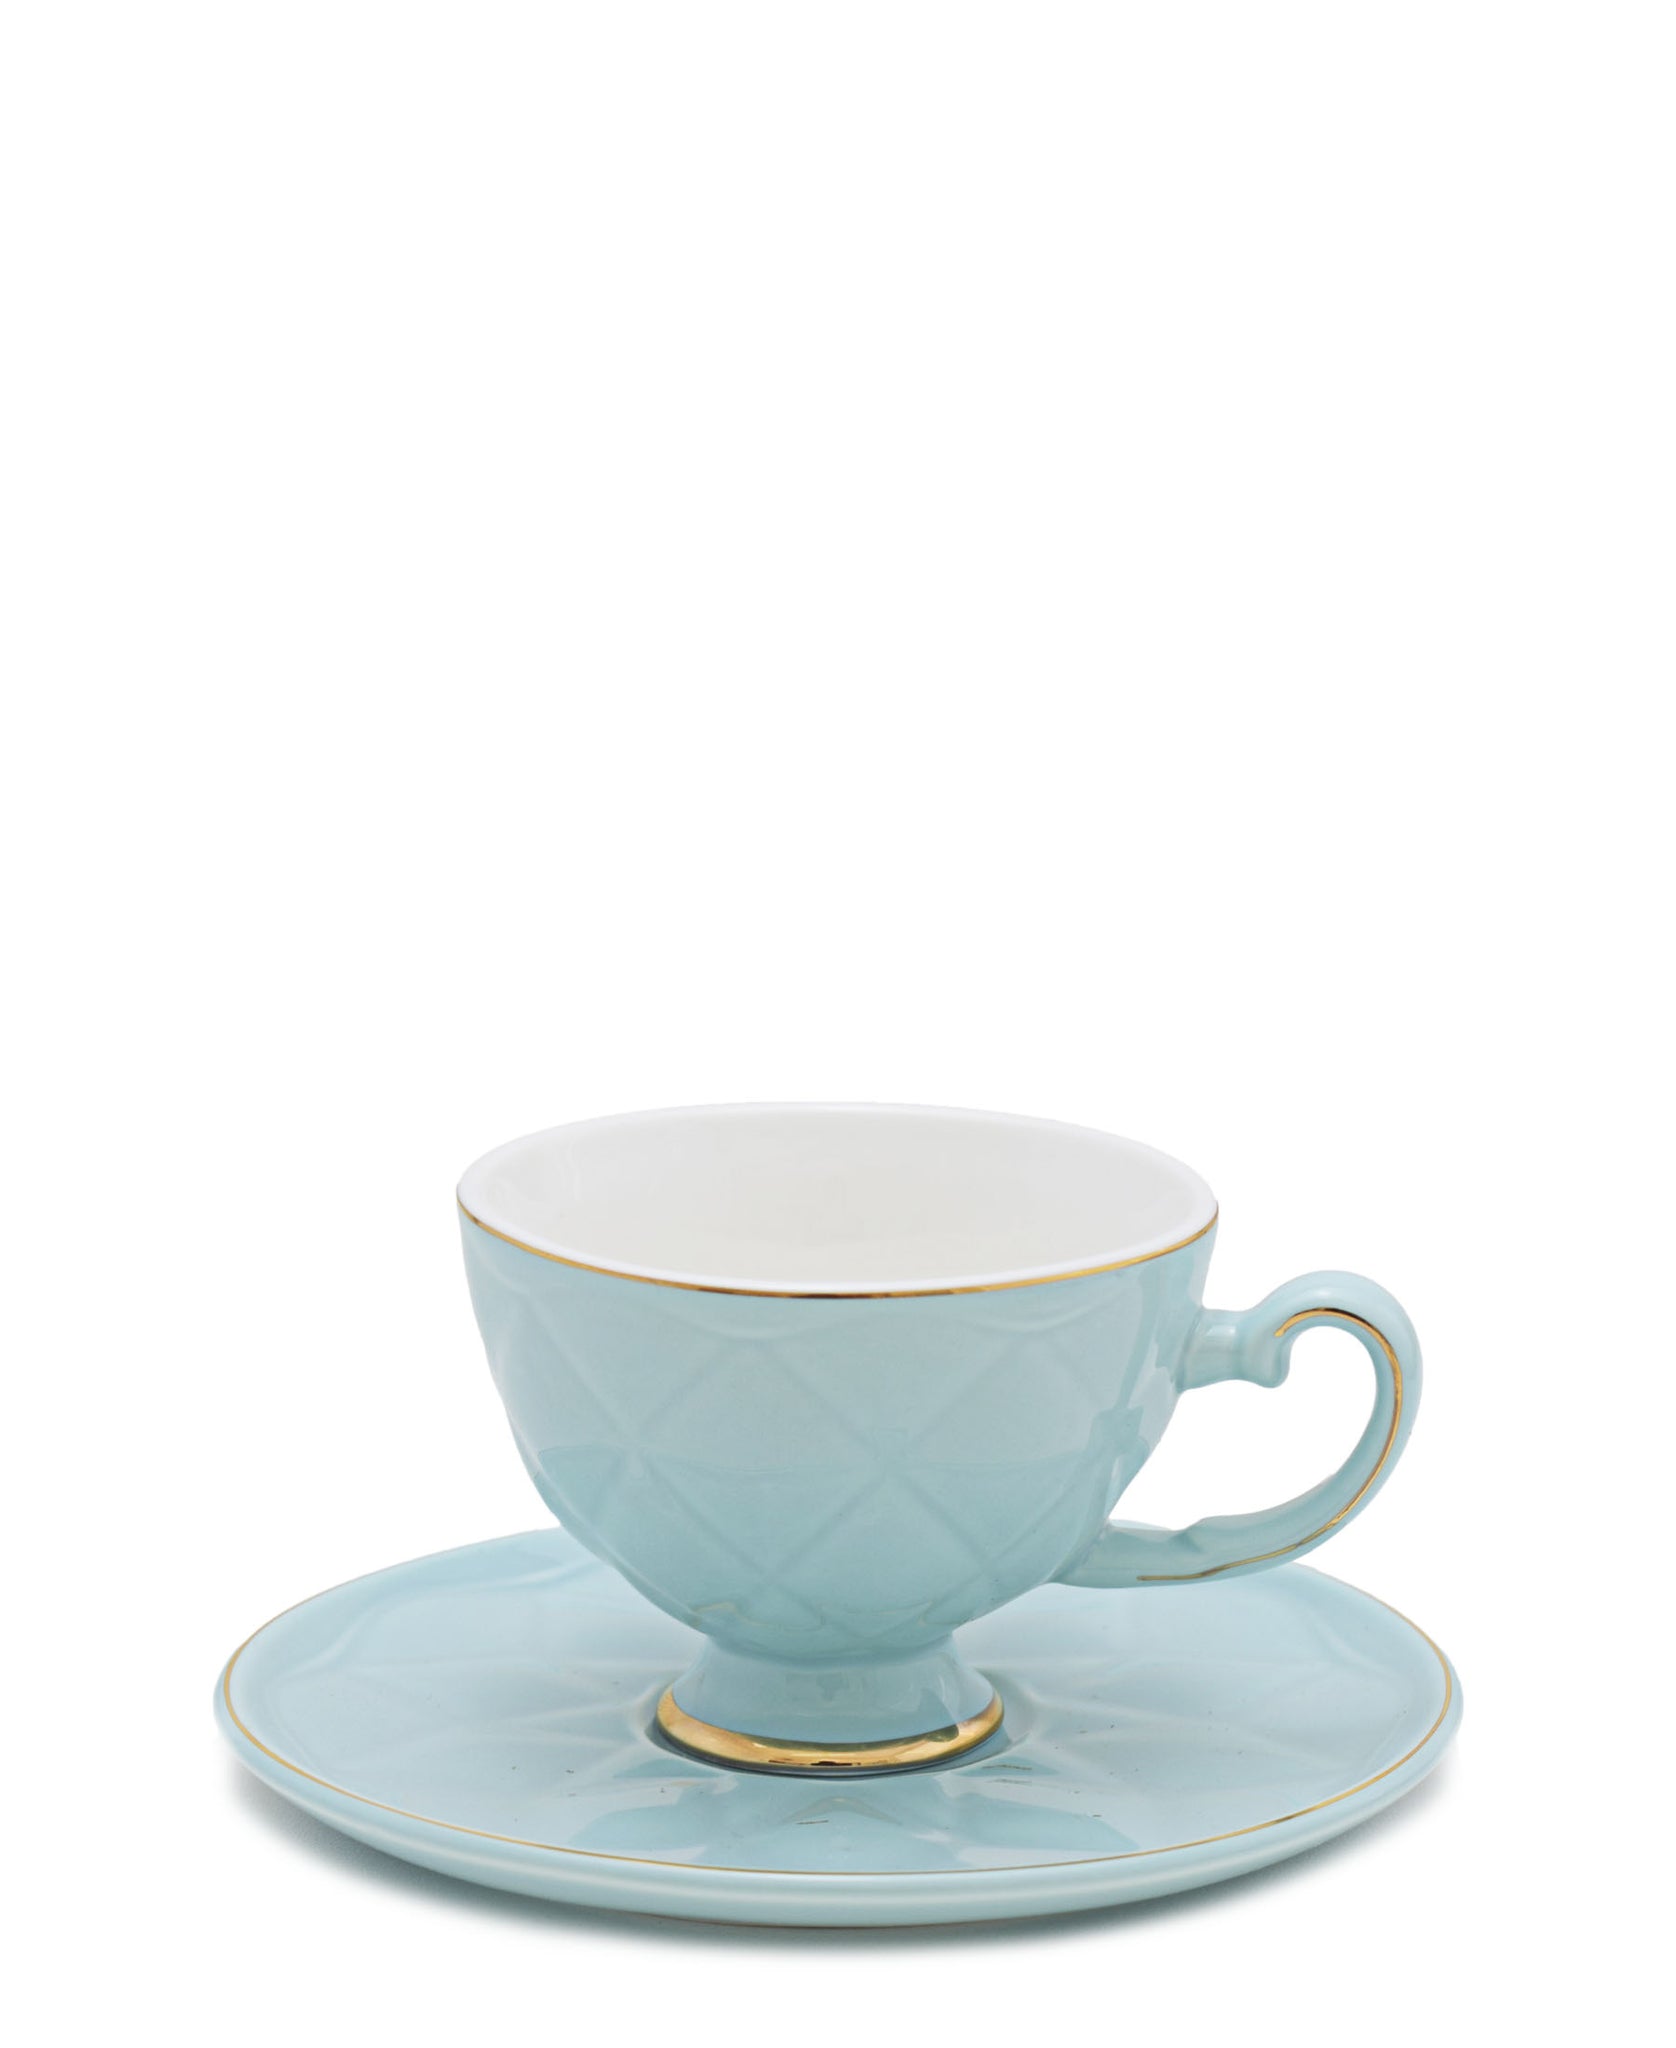 Kitchen Life Cup & Saucer 3 Piece - Blue With Gold Rim